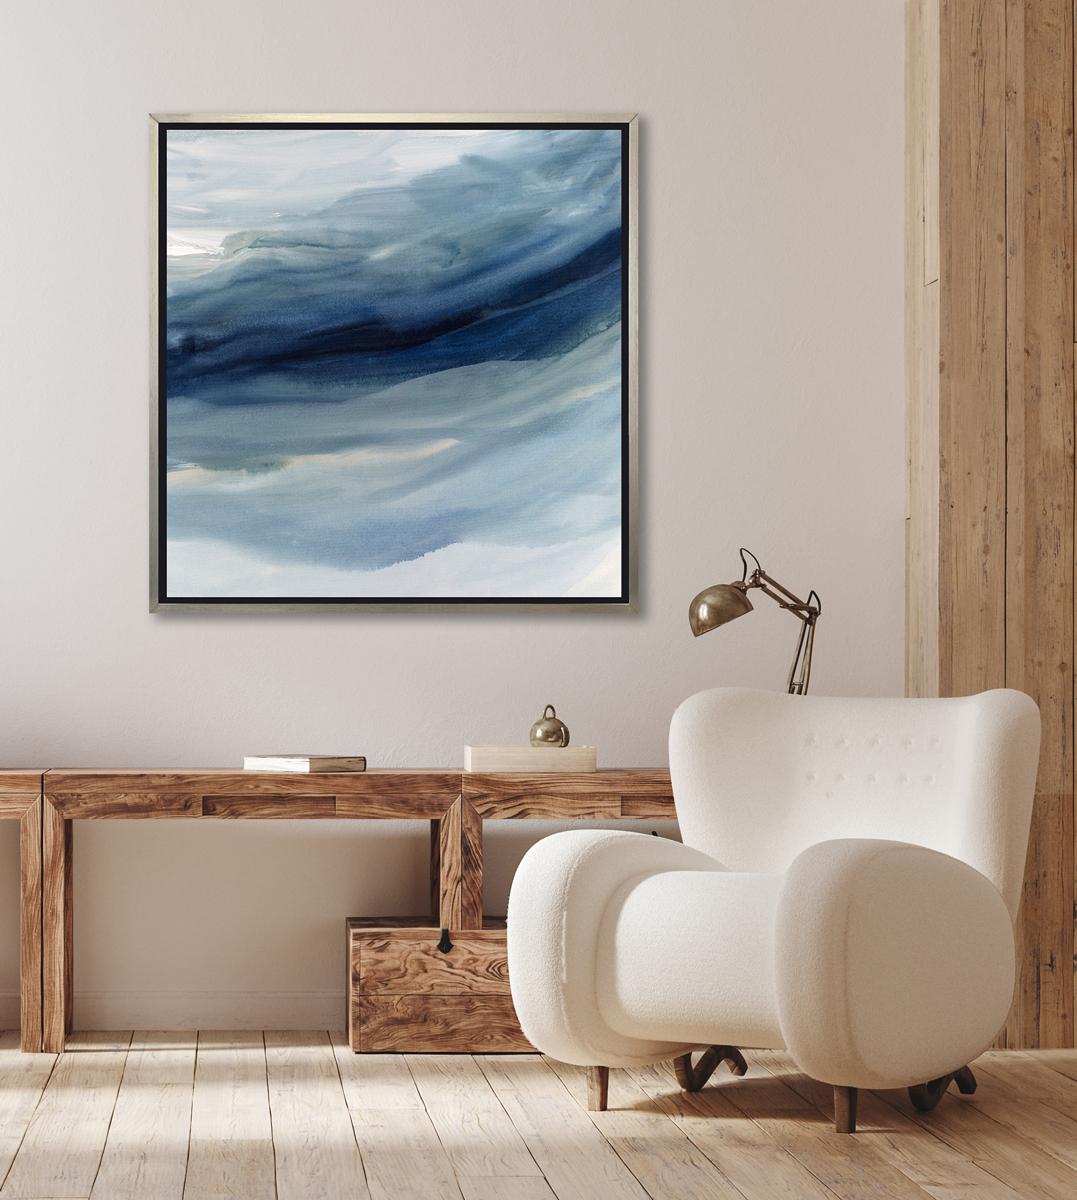 This contemporary limited edition print by Teodora Guererra features a cool wash of blue and white with an abstracted coastal aesthetic. This print pairs beautifully with Indigo Sea I - a limited edition print by the same artist. To purchase two